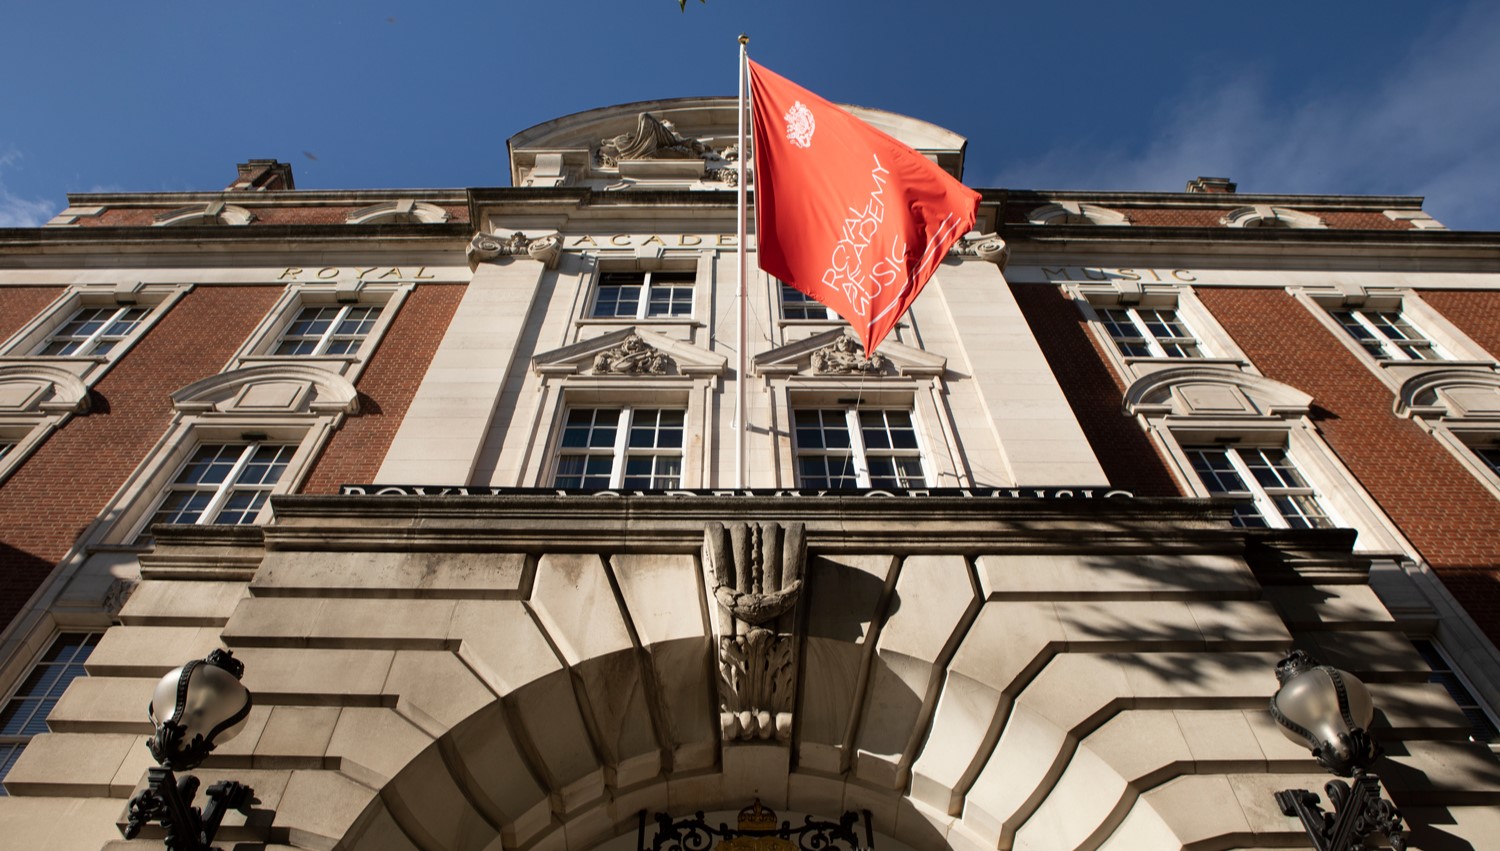 An outside image of the Royal Academy of Music